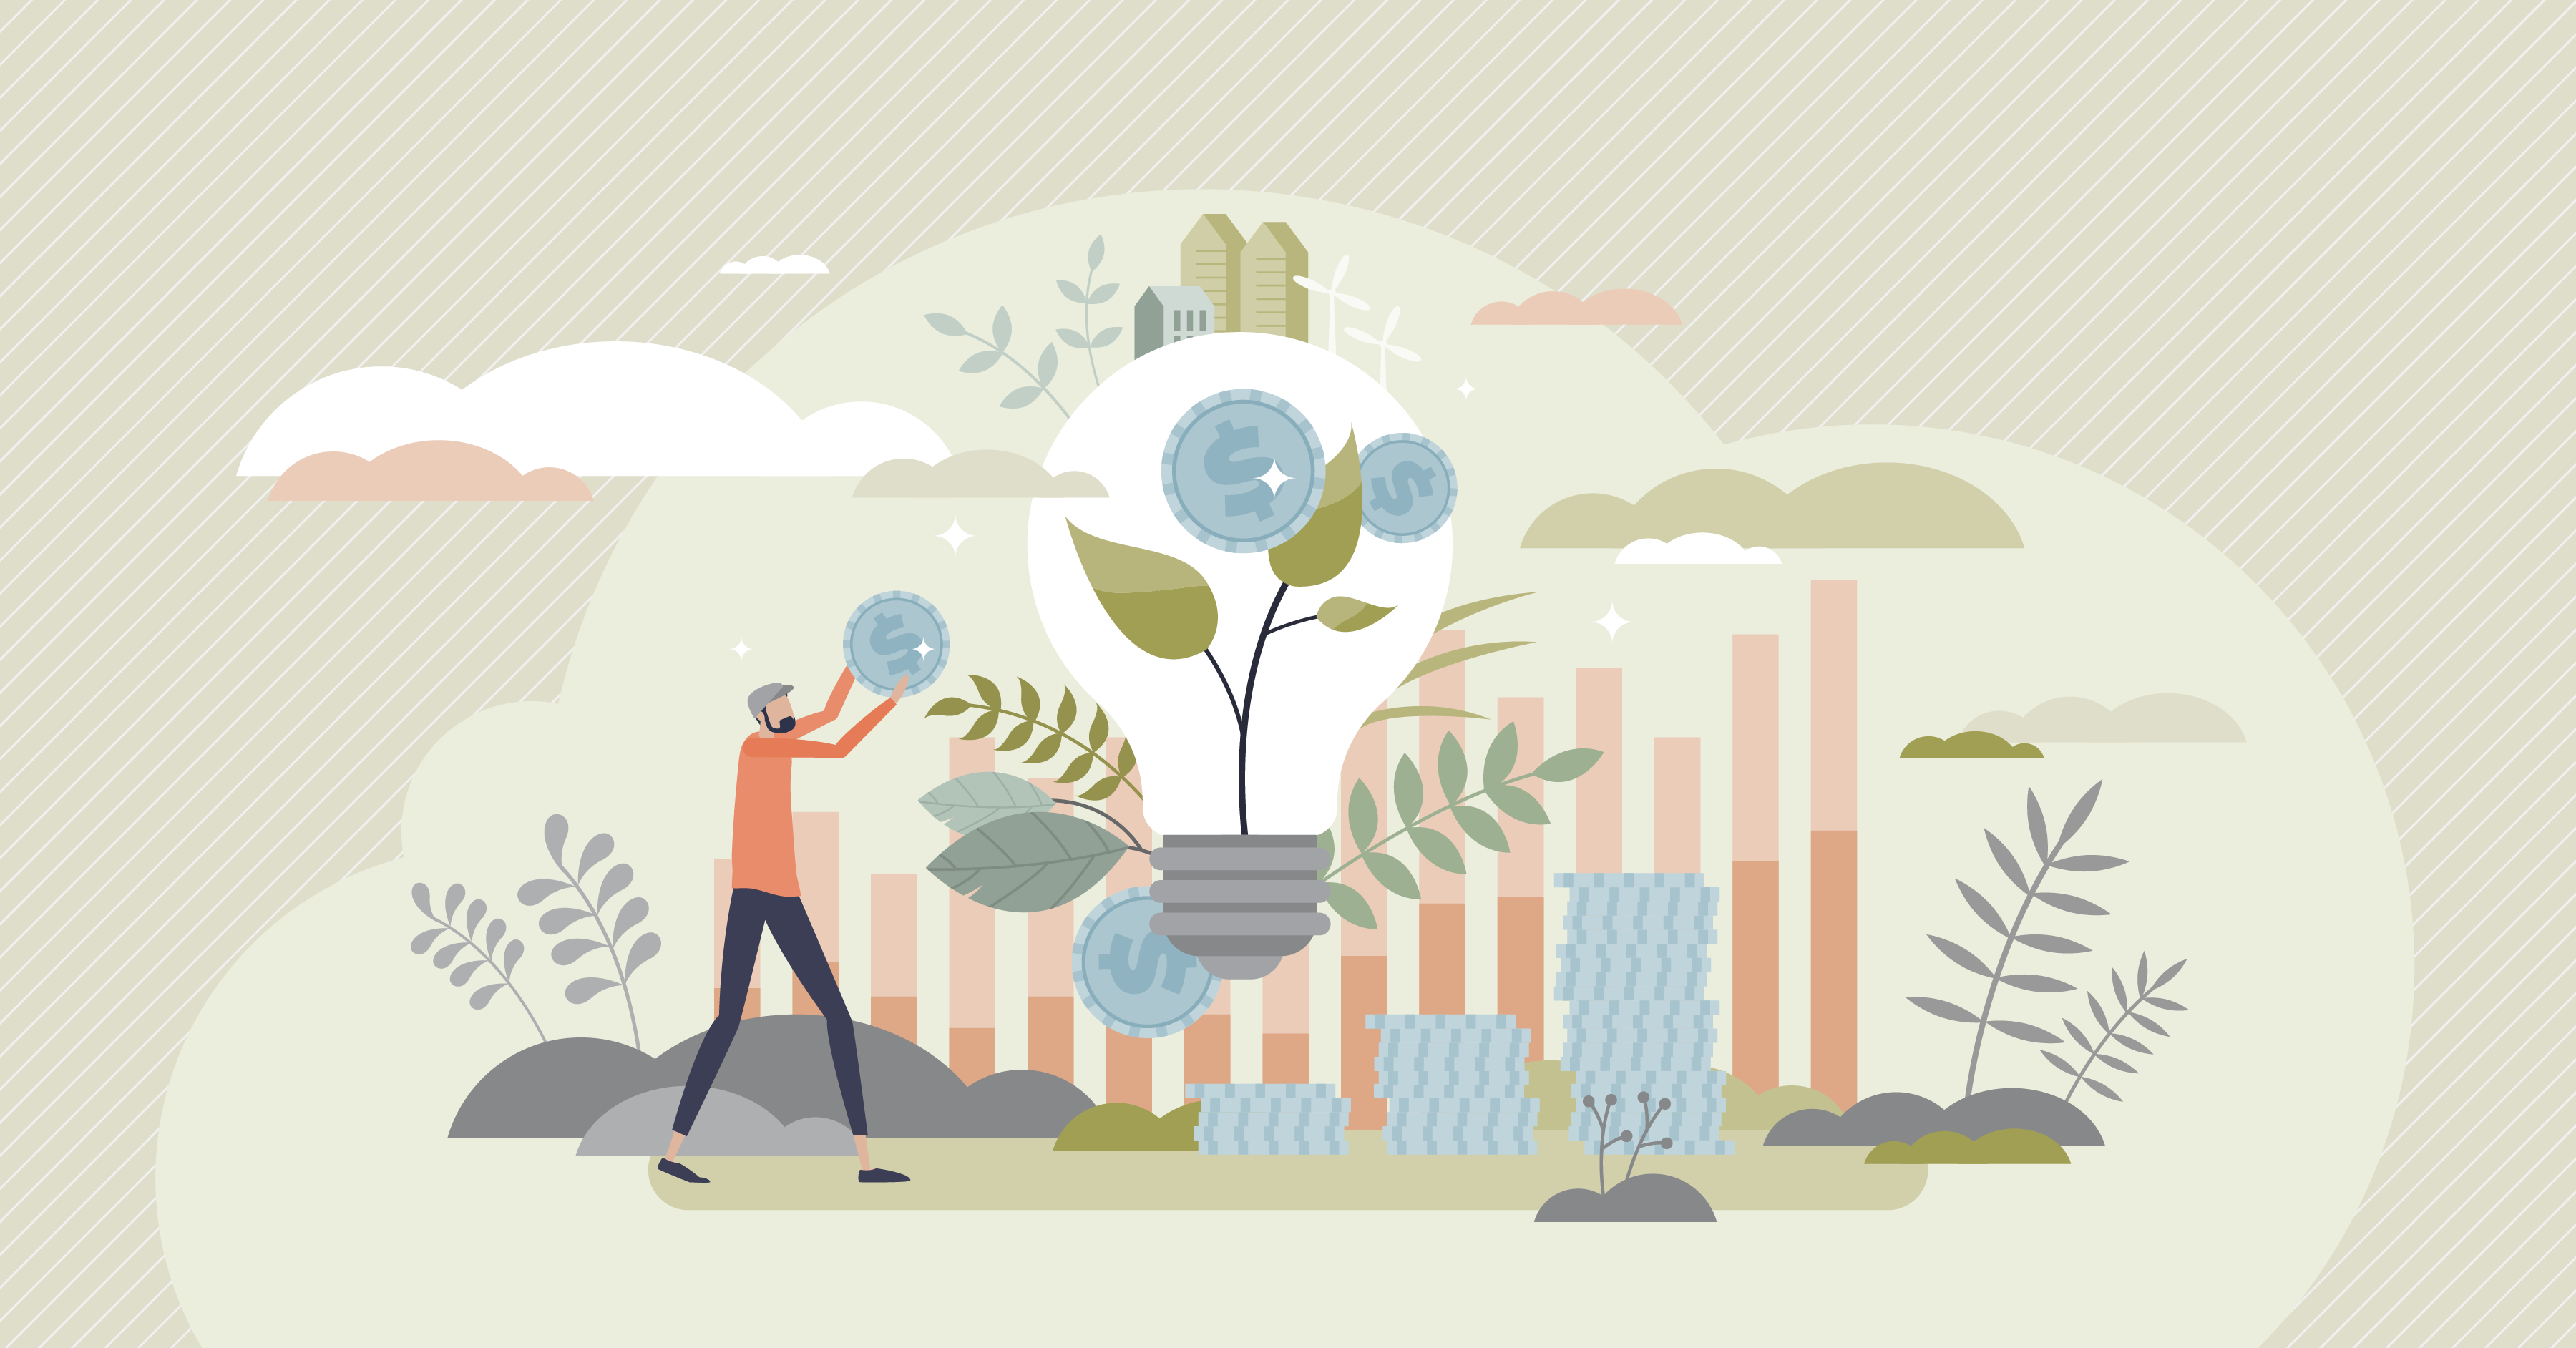 Illustration of a person nurturing a plant growing inside a light bulb, symbolizing the growth of eco-friendly ideas amidst an urban backdrop.